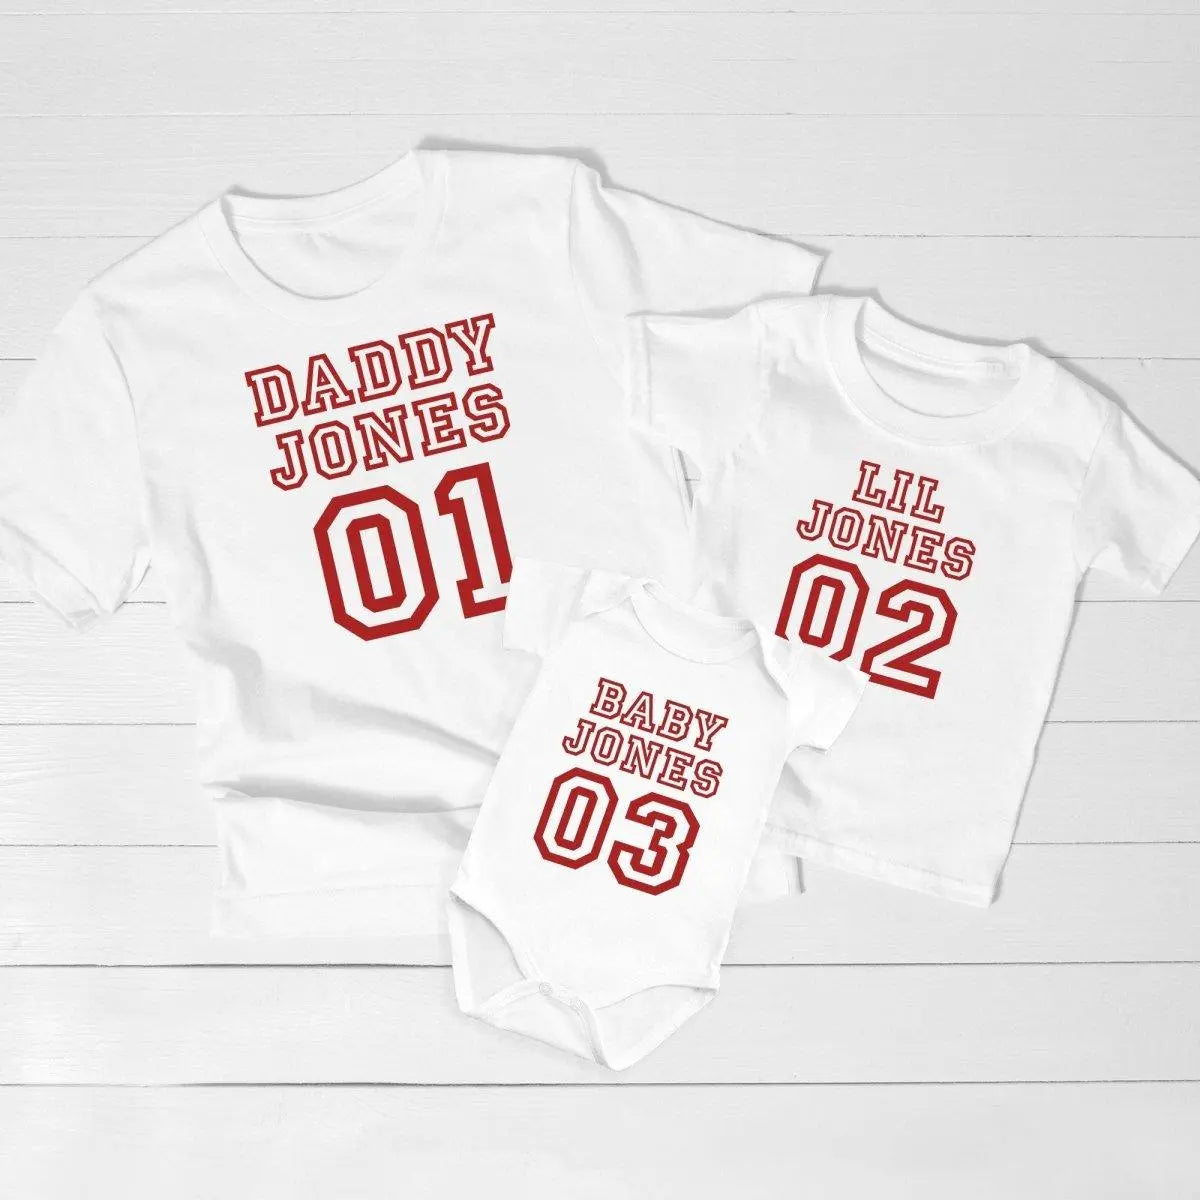 Personalised Fathers Day T-shirt, Matching Family Soccer T-shirts, Father and Son Matching Tops, Father Daughter Shirts, Football T-shirt - Amy Lucy